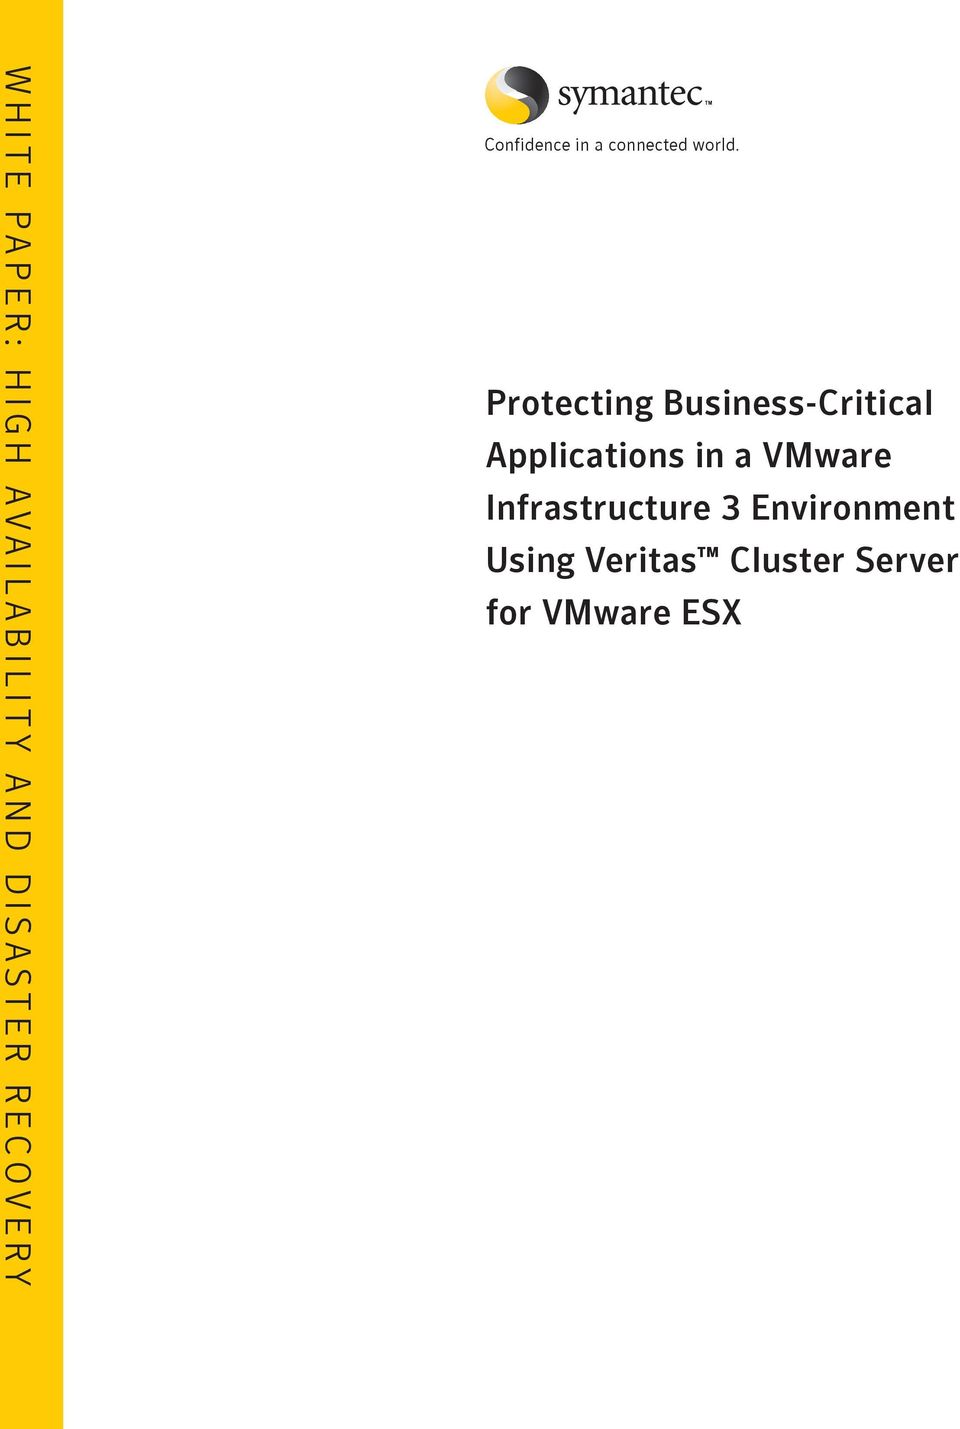 Protecting Business-Critical Applications in a VMware